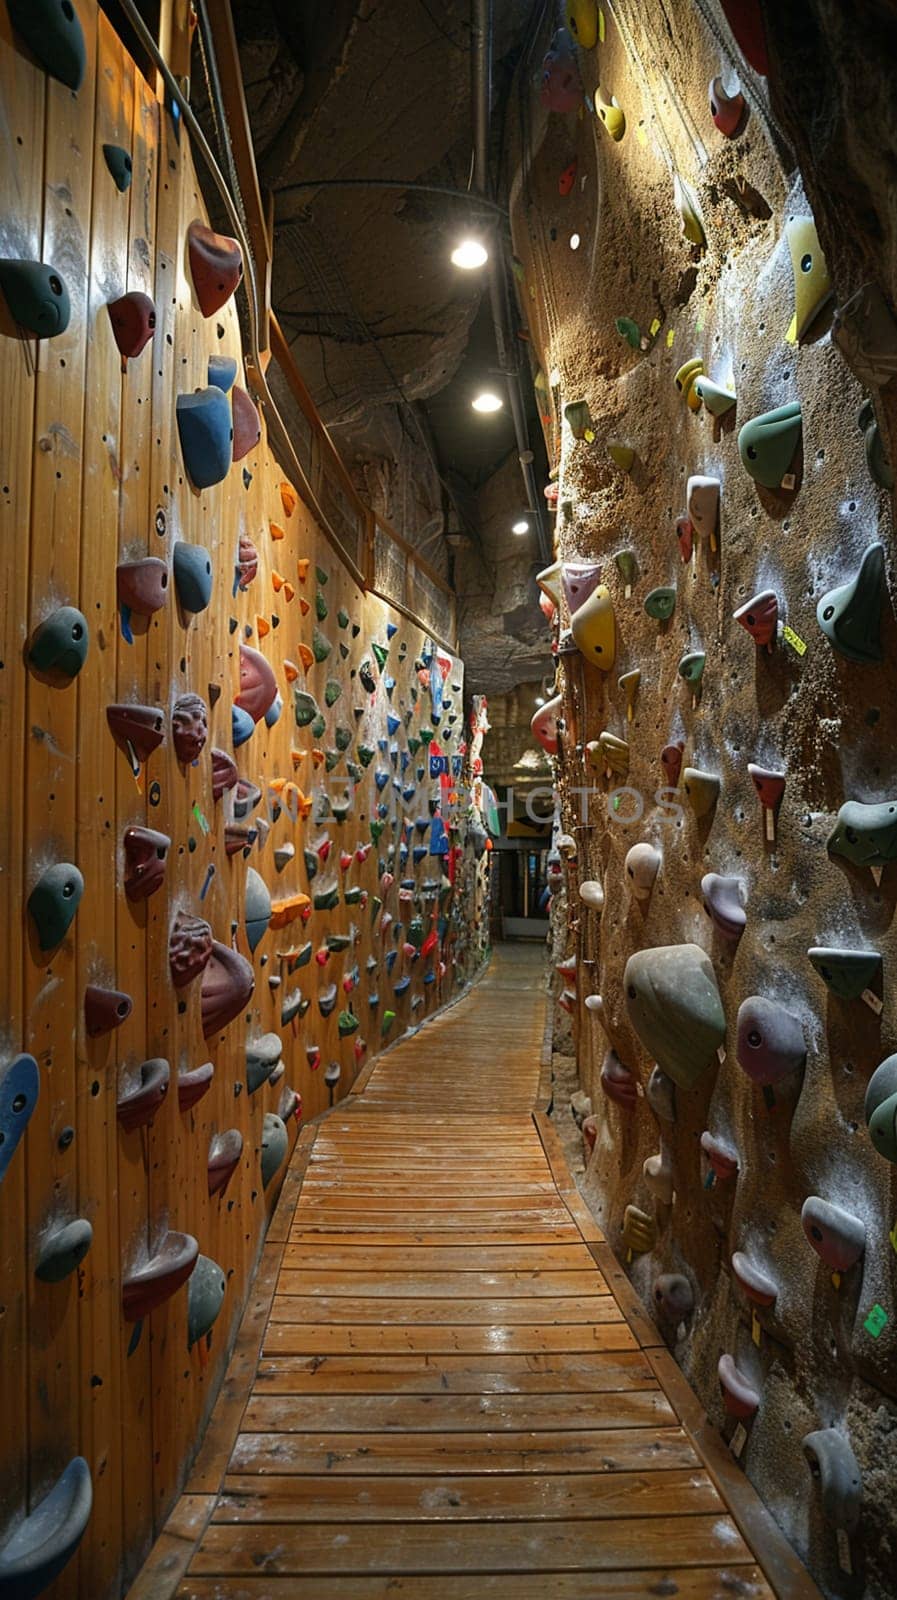 Rock Climbing Gym Ascends Adventure in Business of Indoor Sports, Harnesses and climbing routes scale a story of challenge and fitness in the climbing gym business.